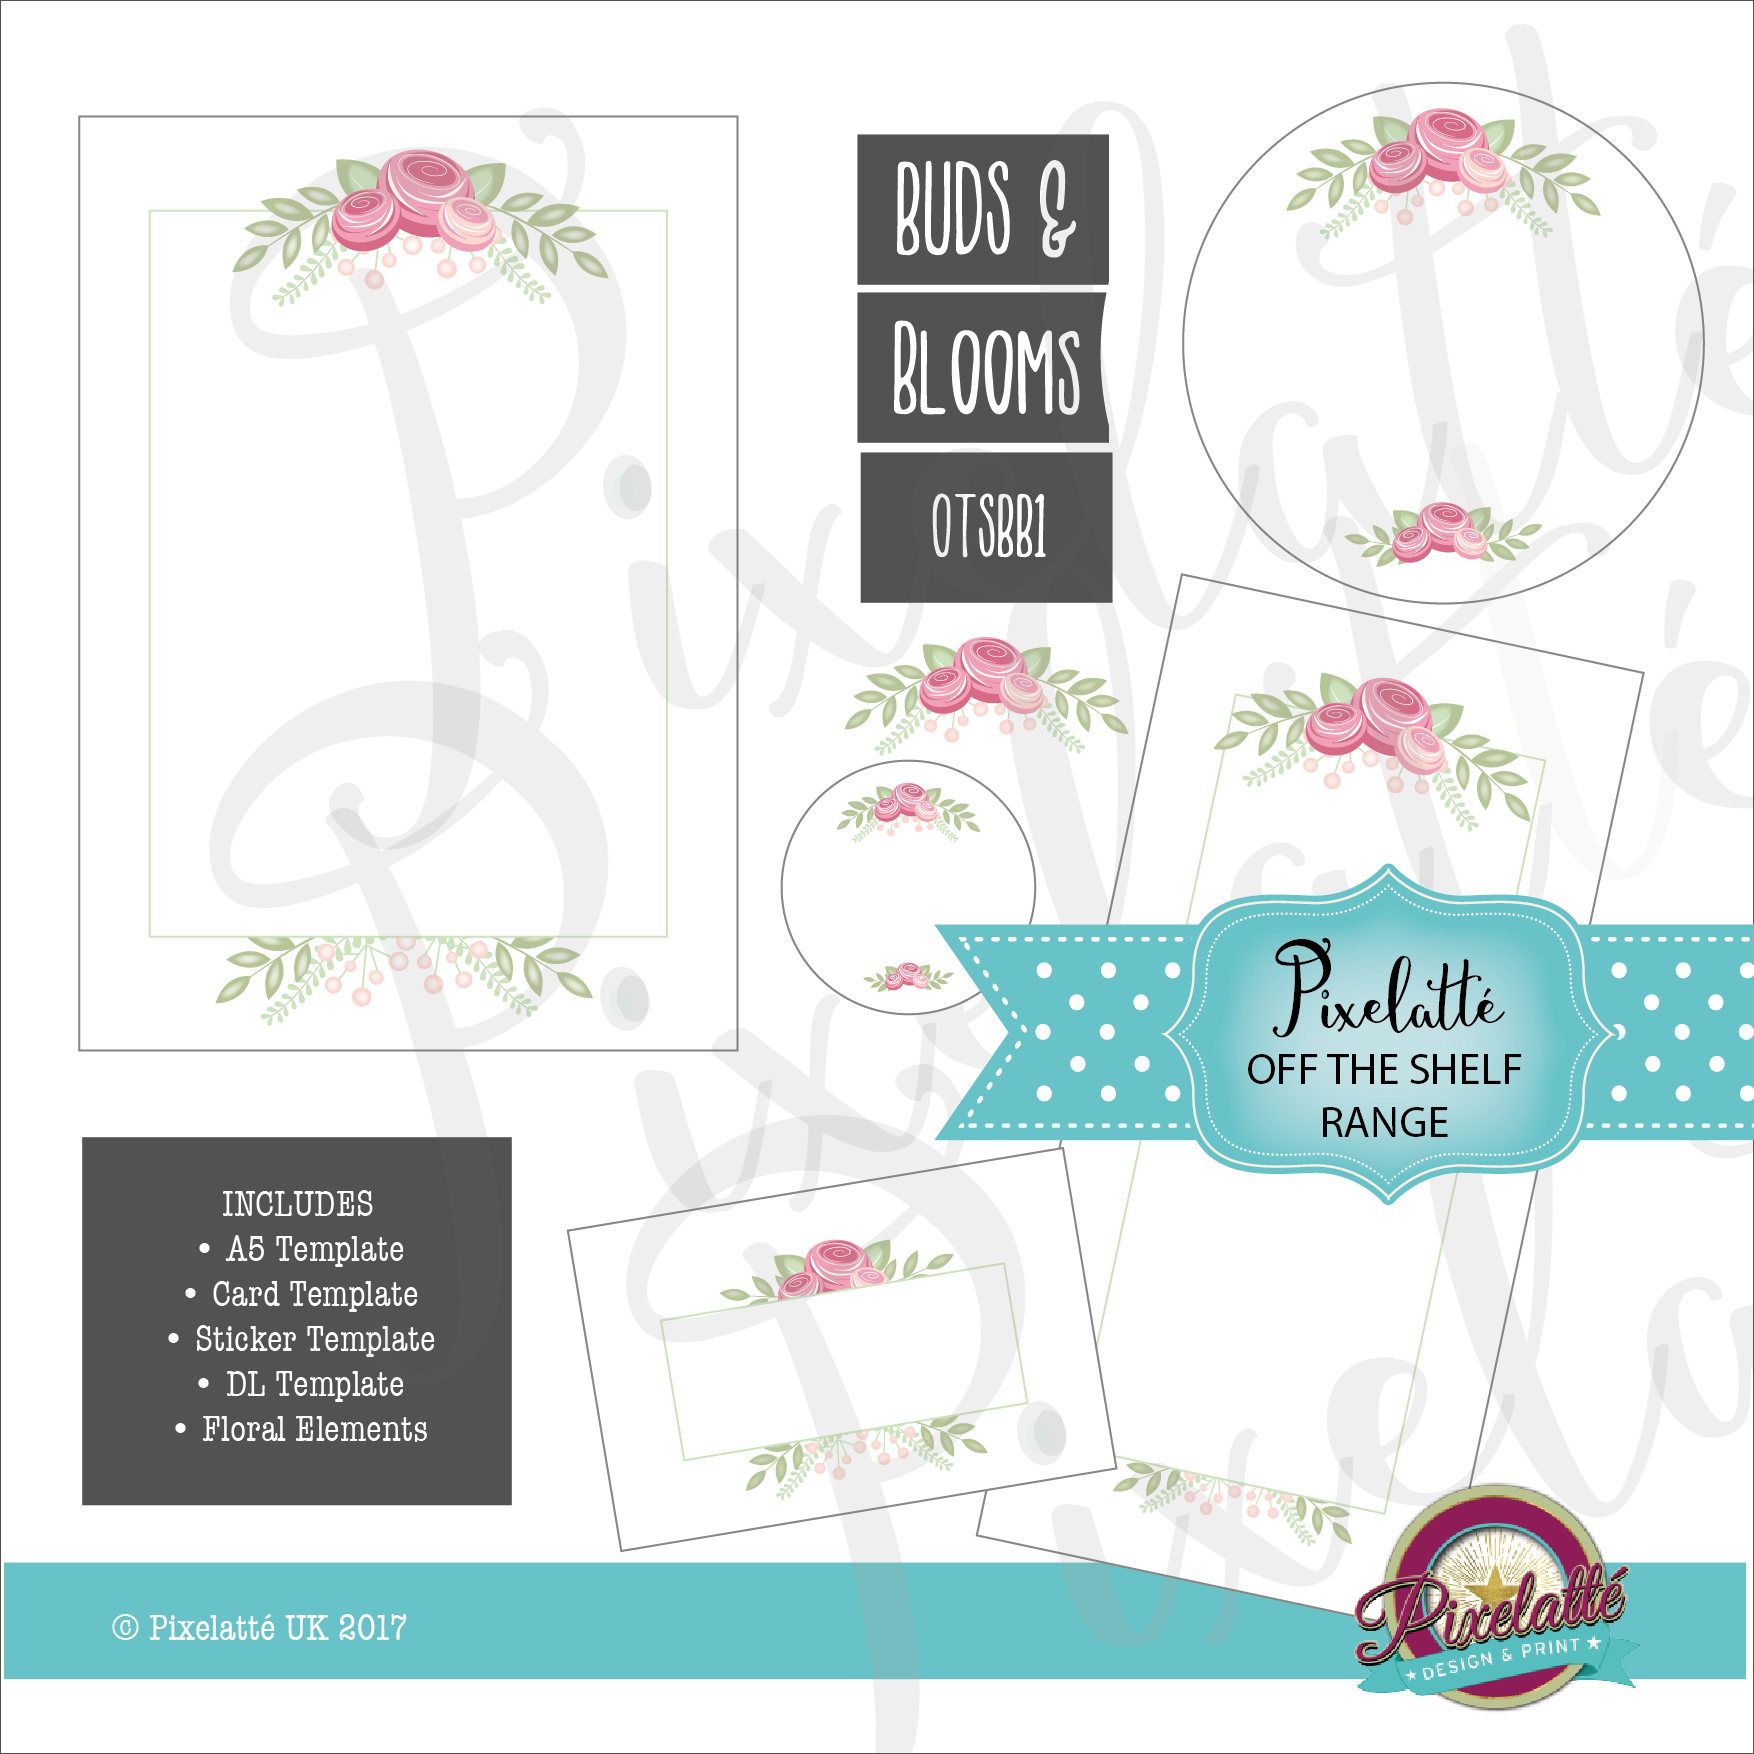 Buds & Blooms Floral Bouquet Design Templates and Clipart.